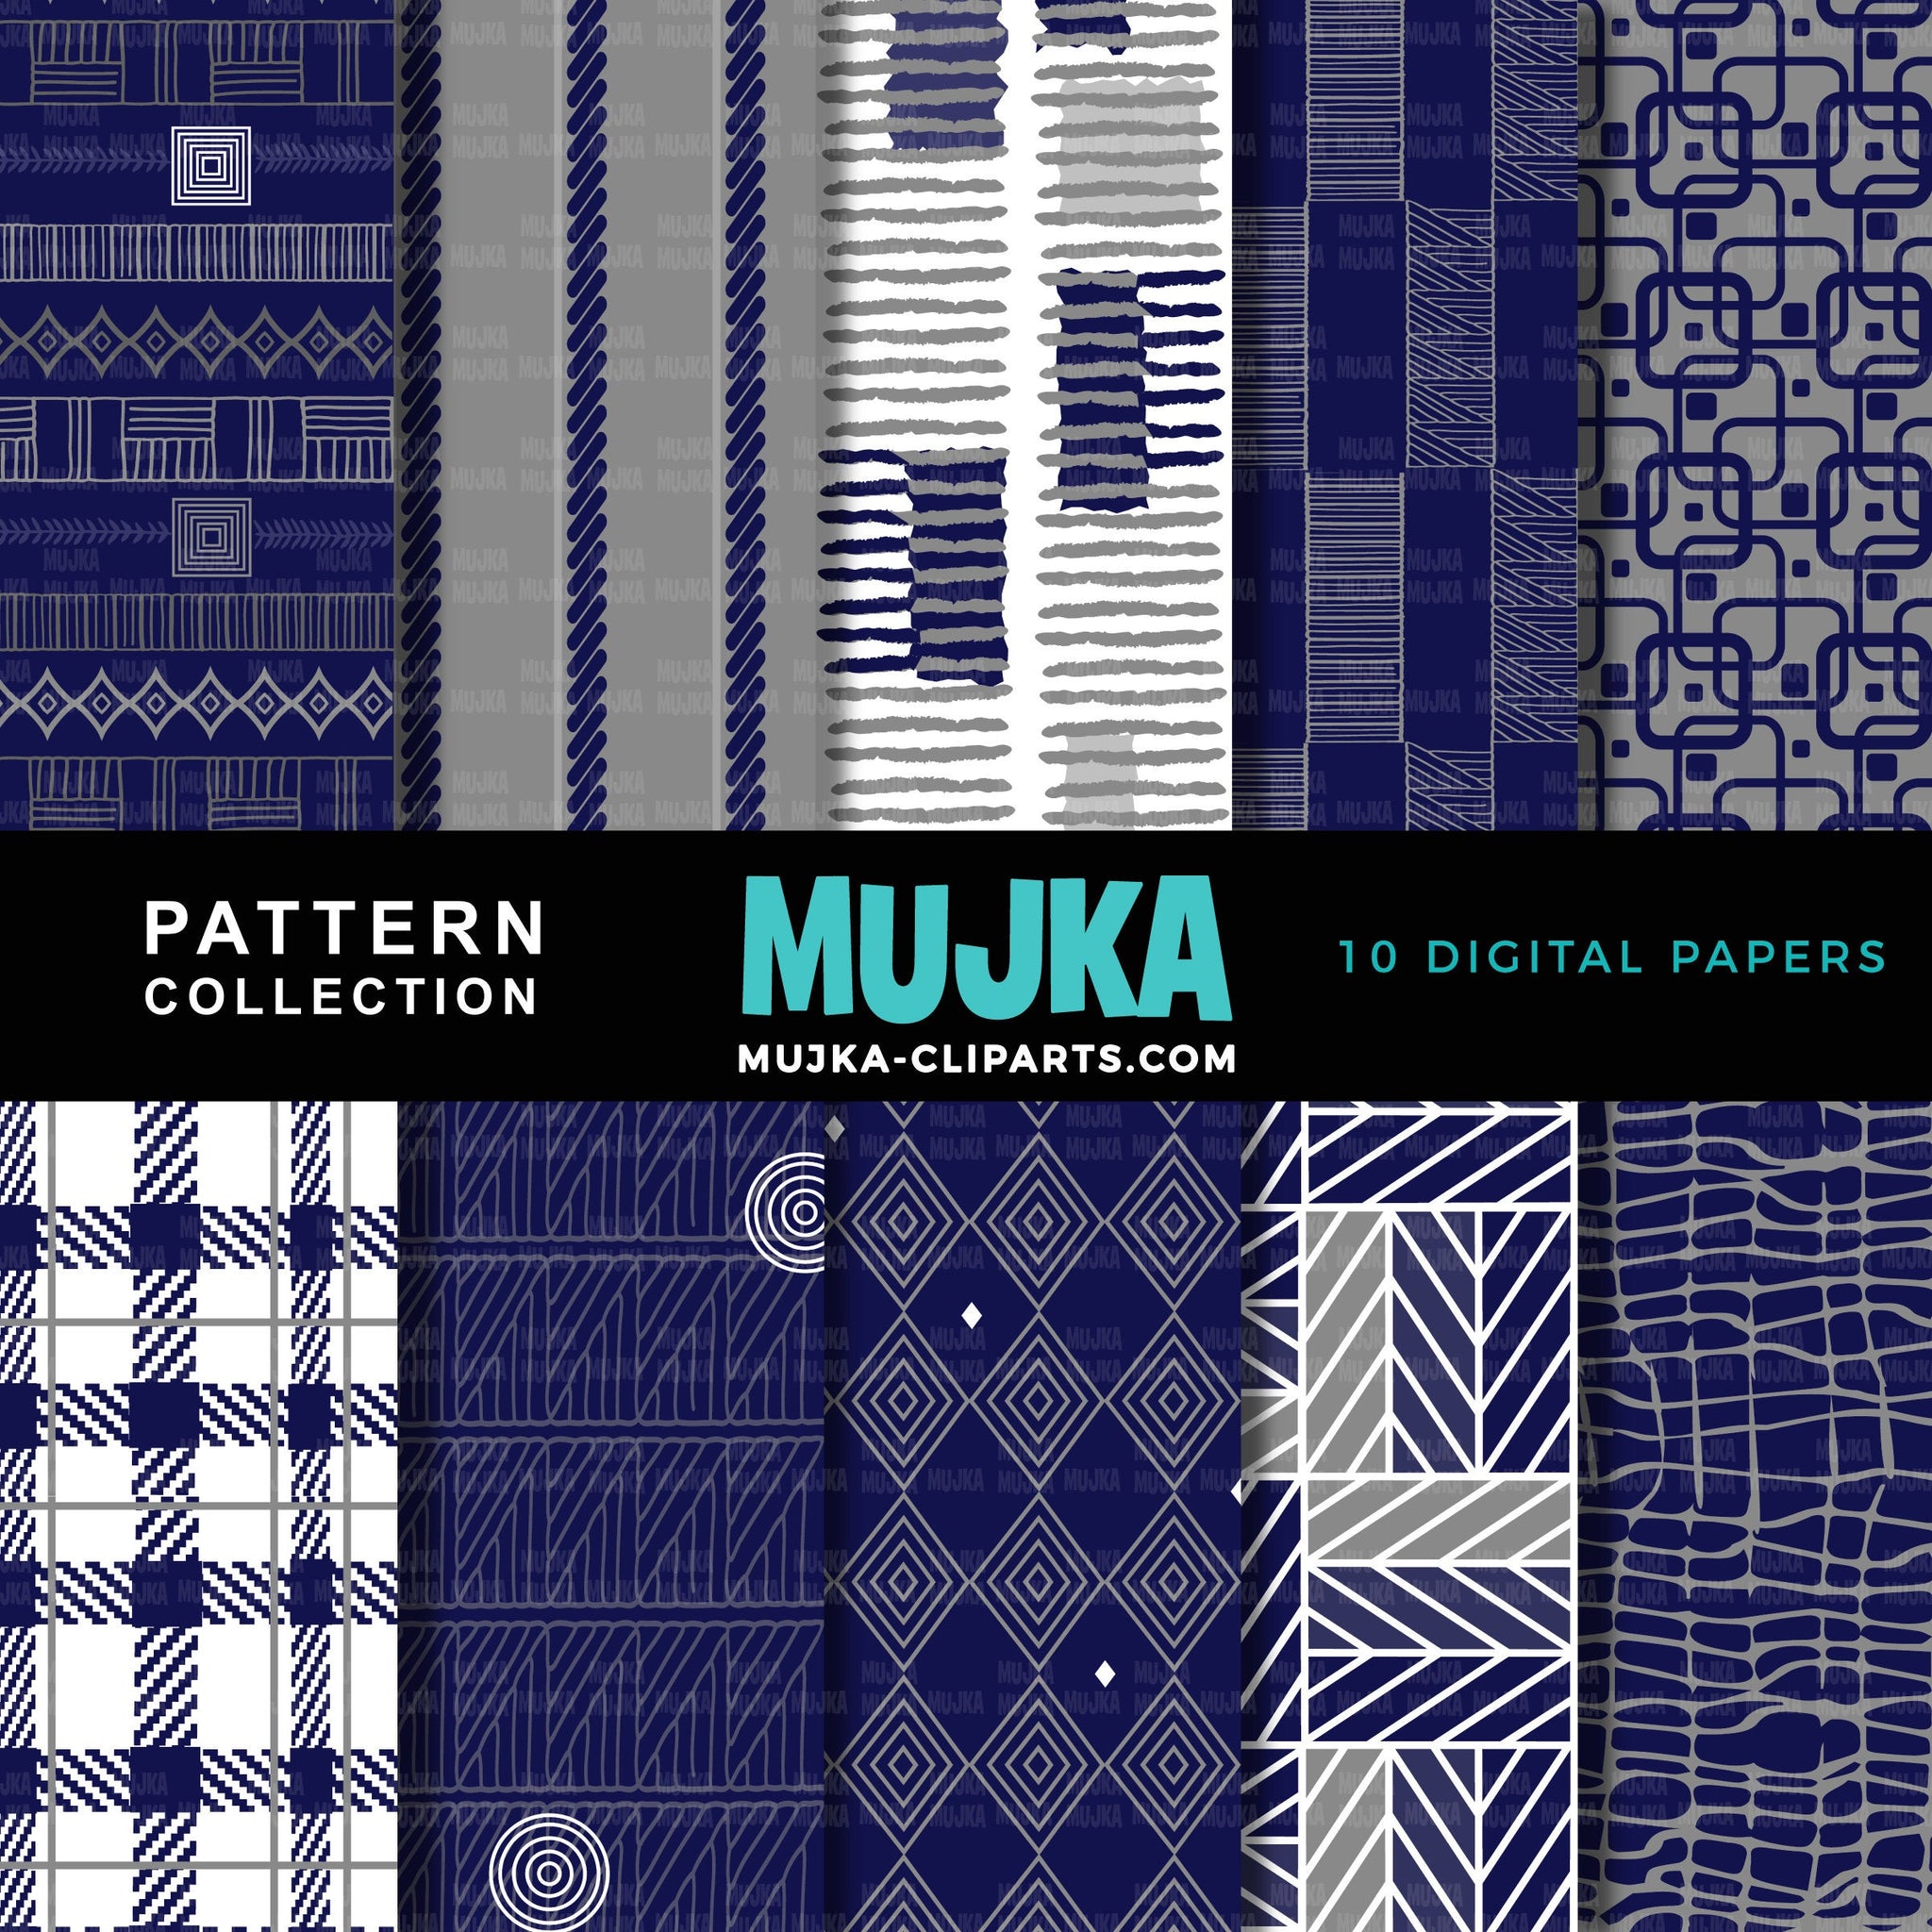 Masculine digital papers, men's digital patterns, seamless scrapbook papers, navy blue white digital papers, father's day, new year papers